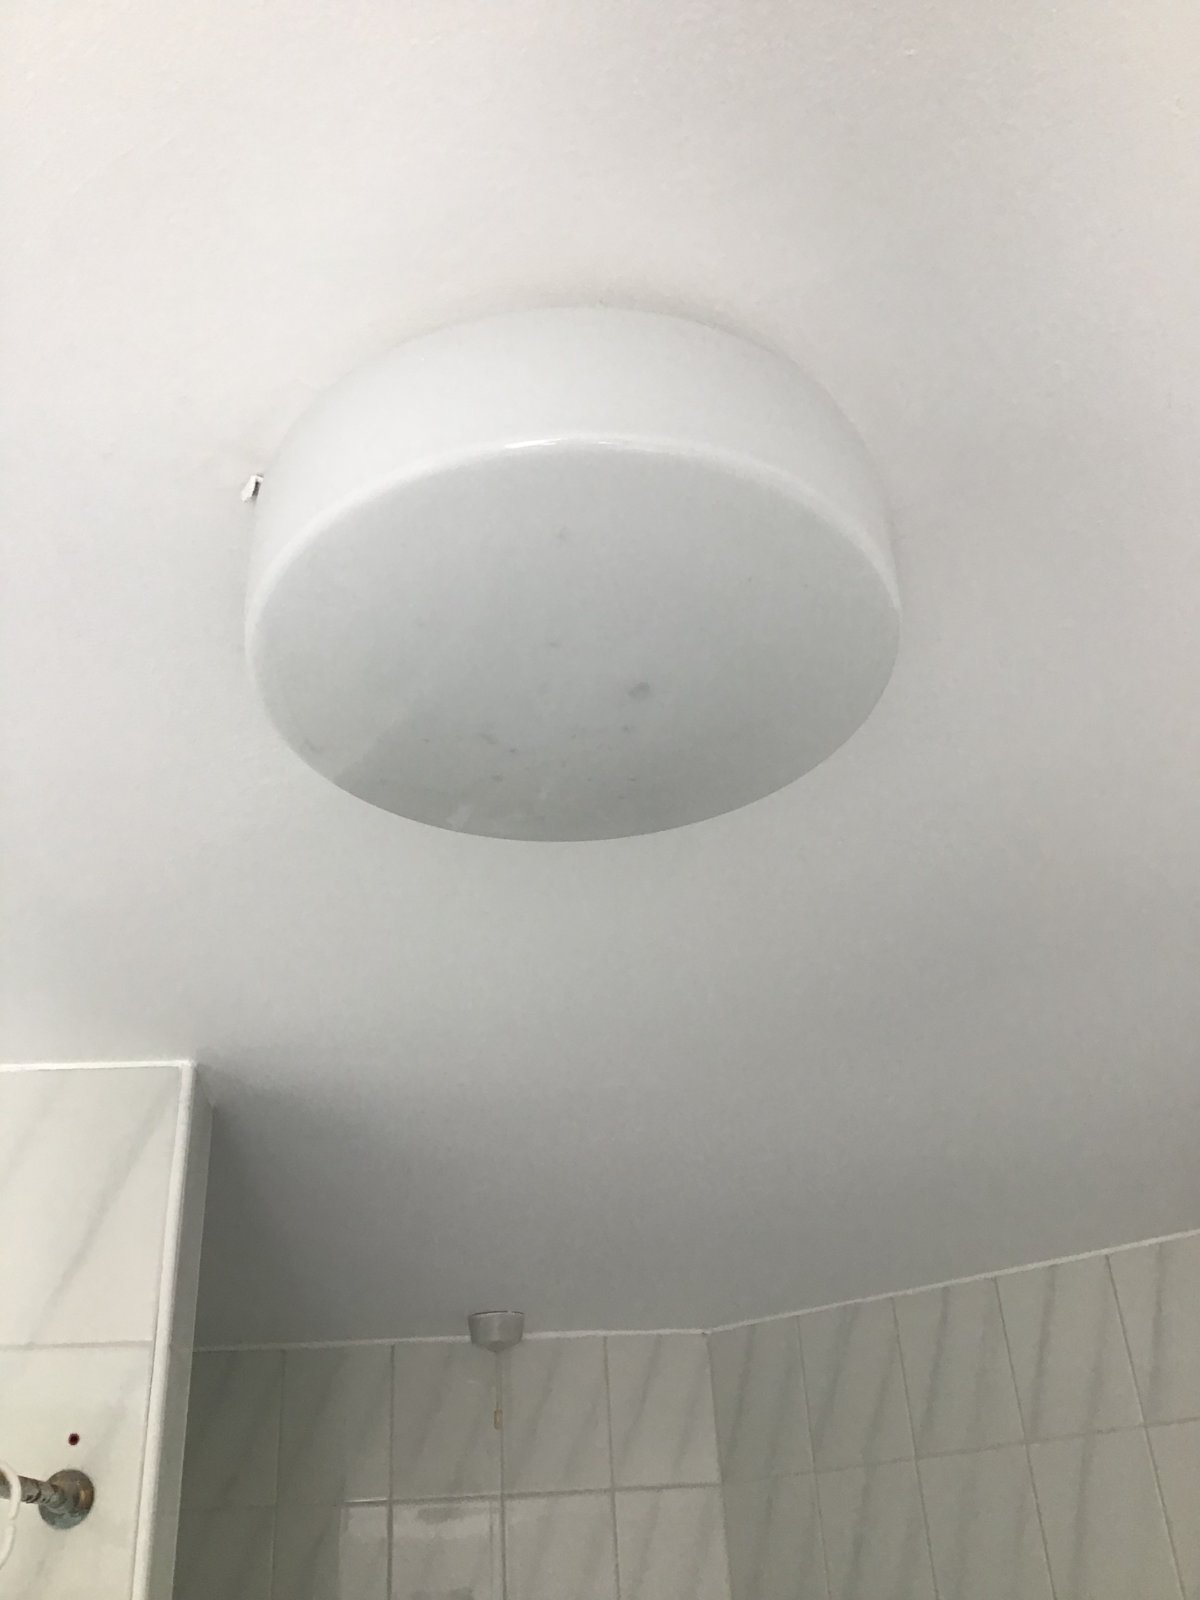 Remove Cover From Bathroom Light Diynot Forums